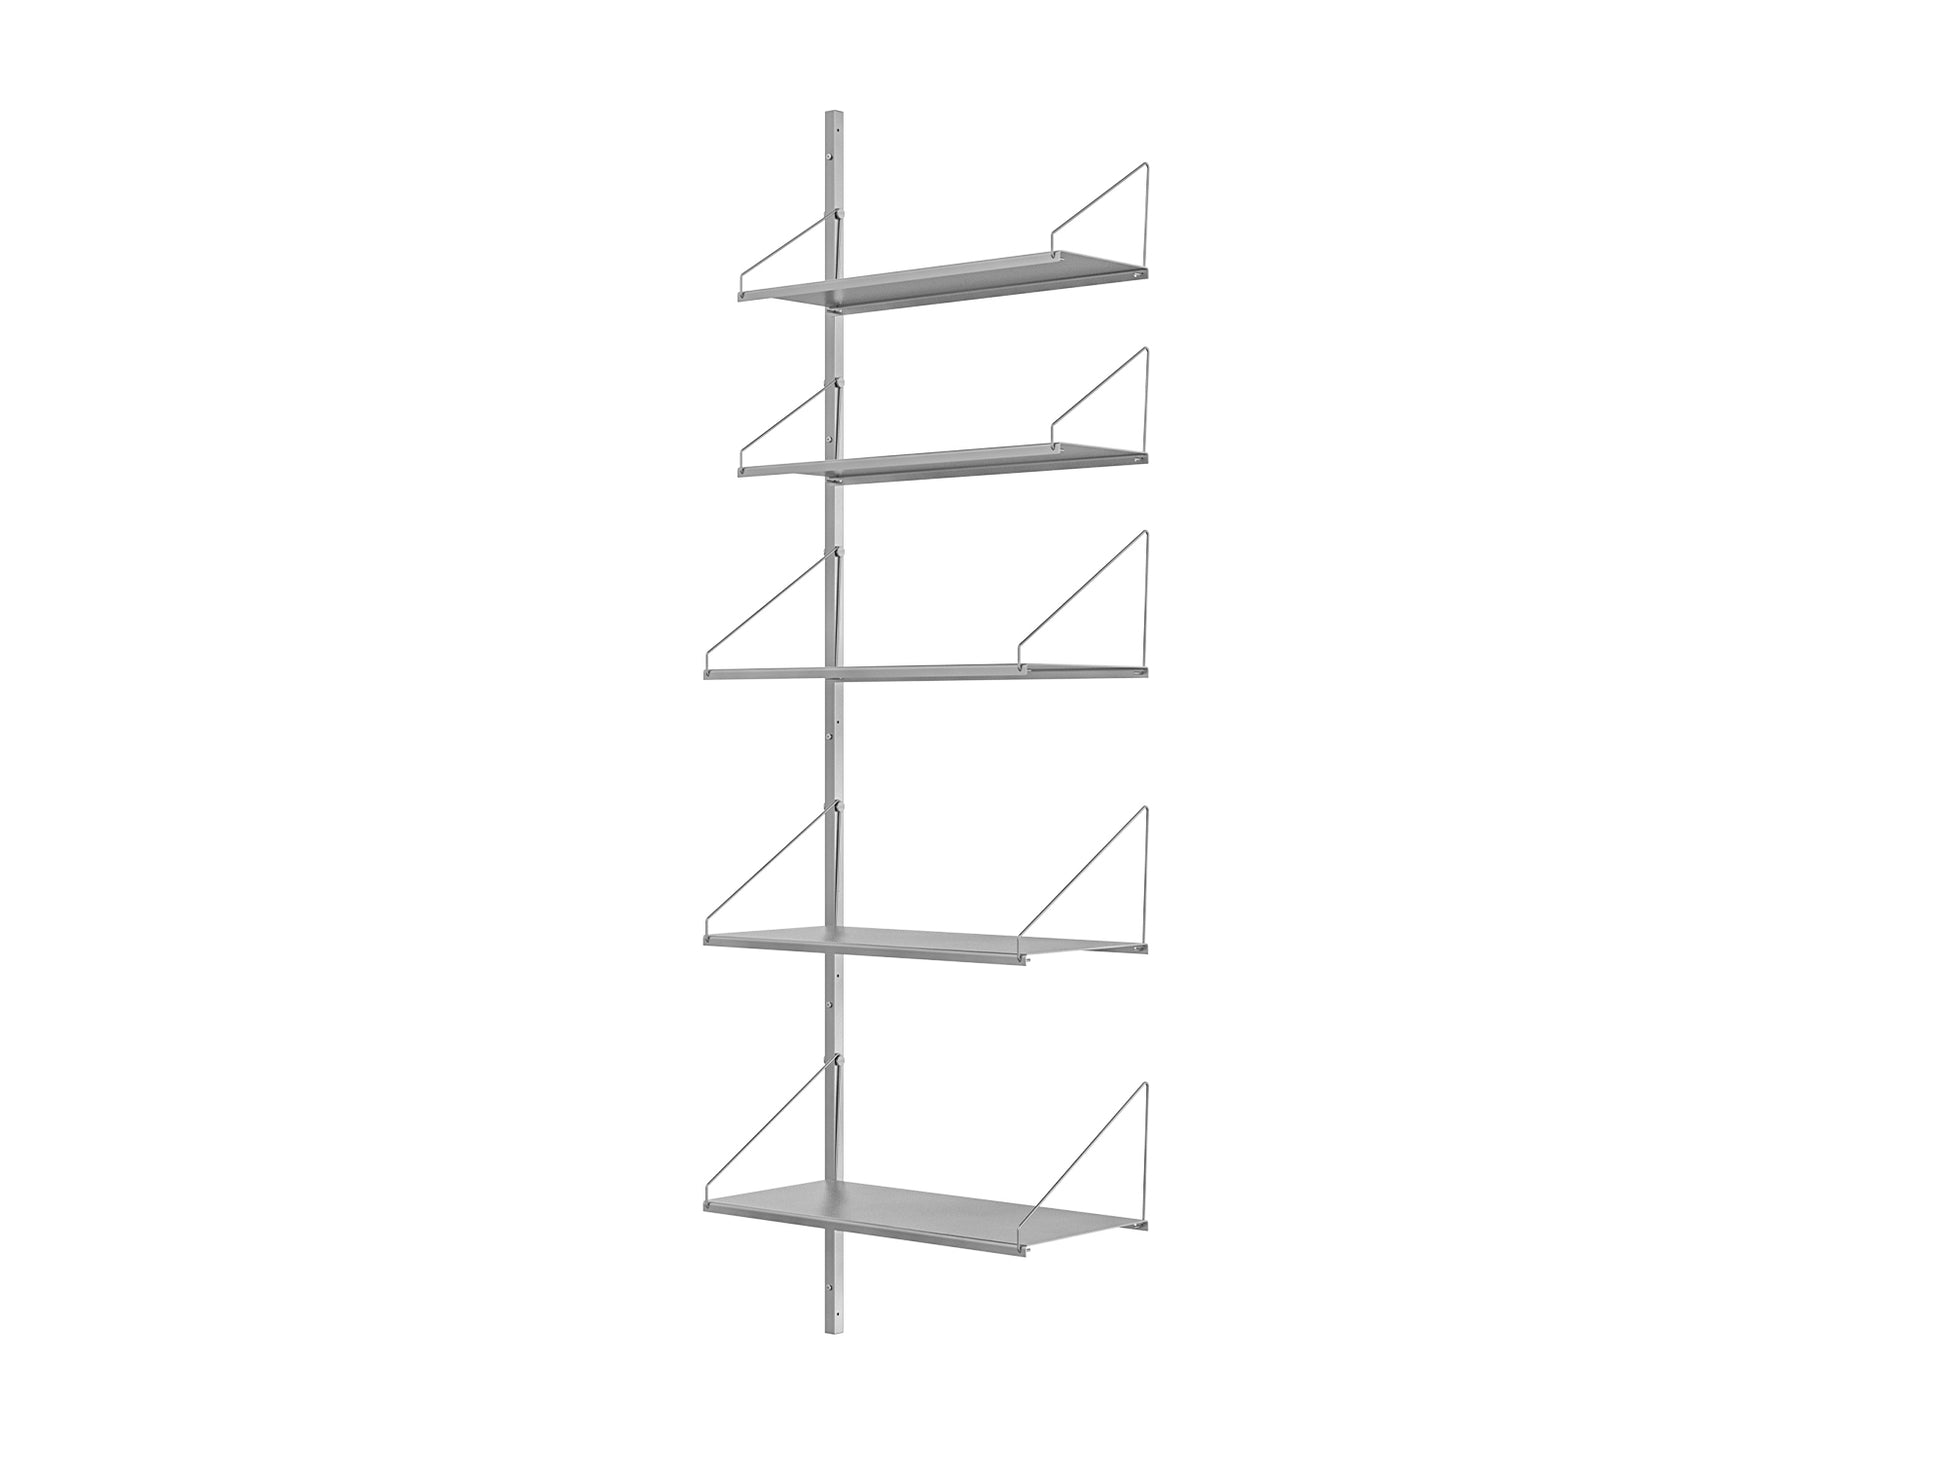 Shelf Library Stainless Steel Add-ons by Frama - H1852 / W60 Section